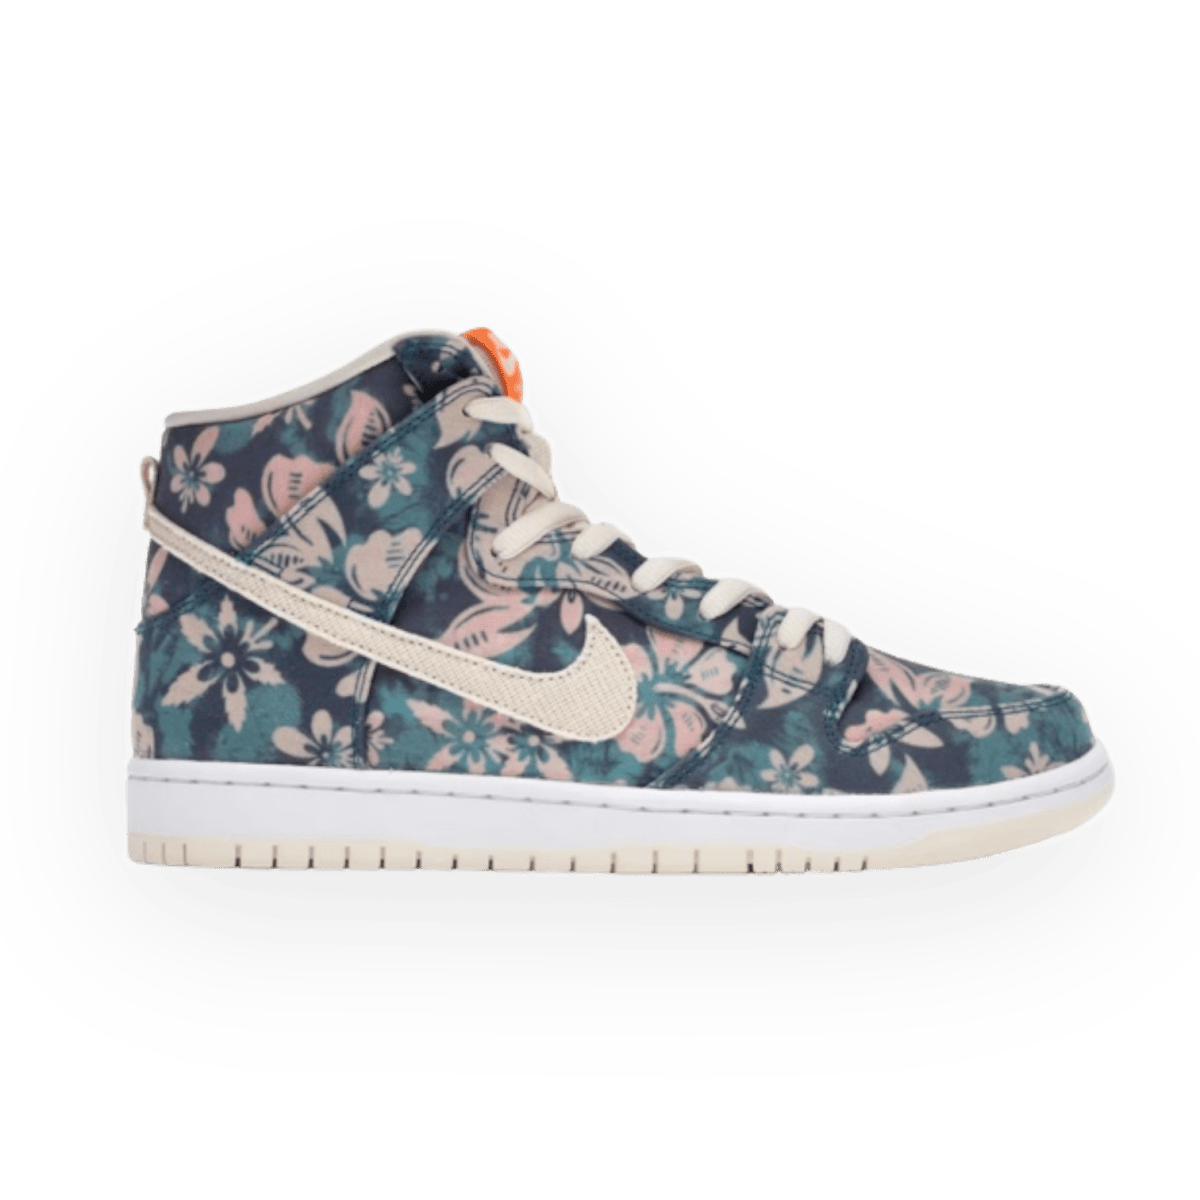 SB Dunk High Hawaii - Gently Enjoyed (Used) Men 13 - No Orange Laces - High Sneaker - Jawns on Fire Sneakers & Streetwear